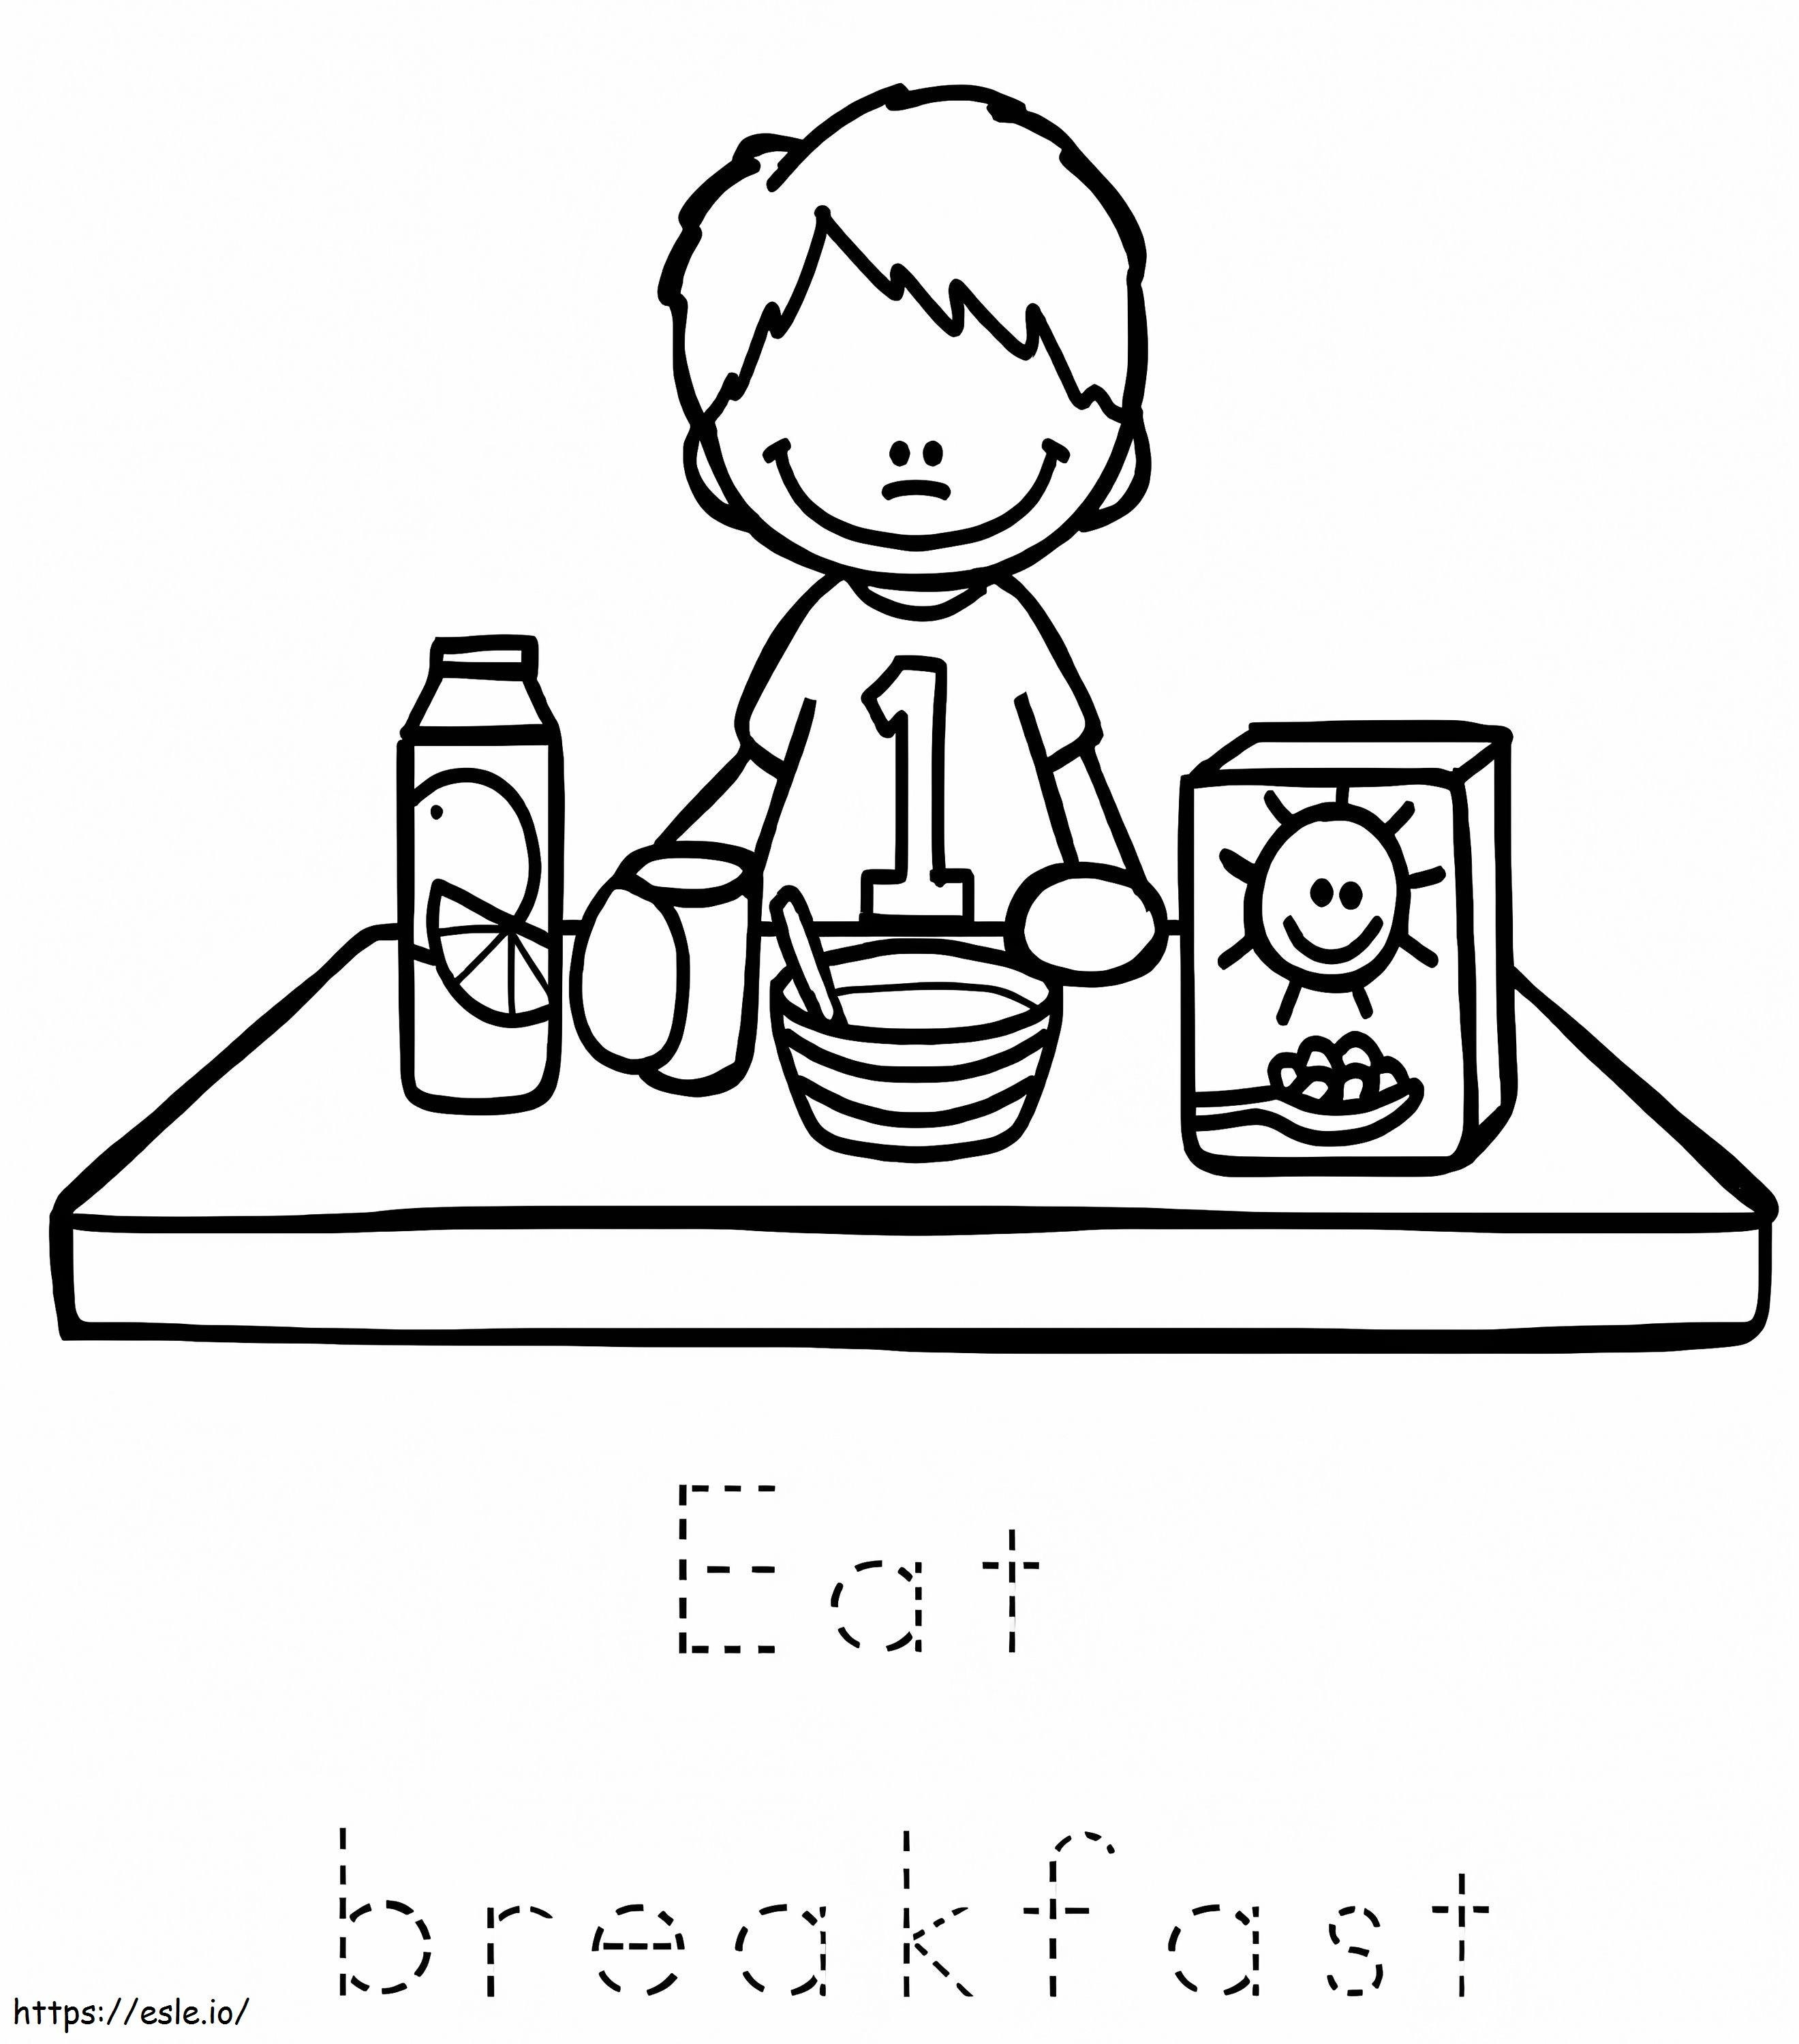 Eat Breakfast coloring page